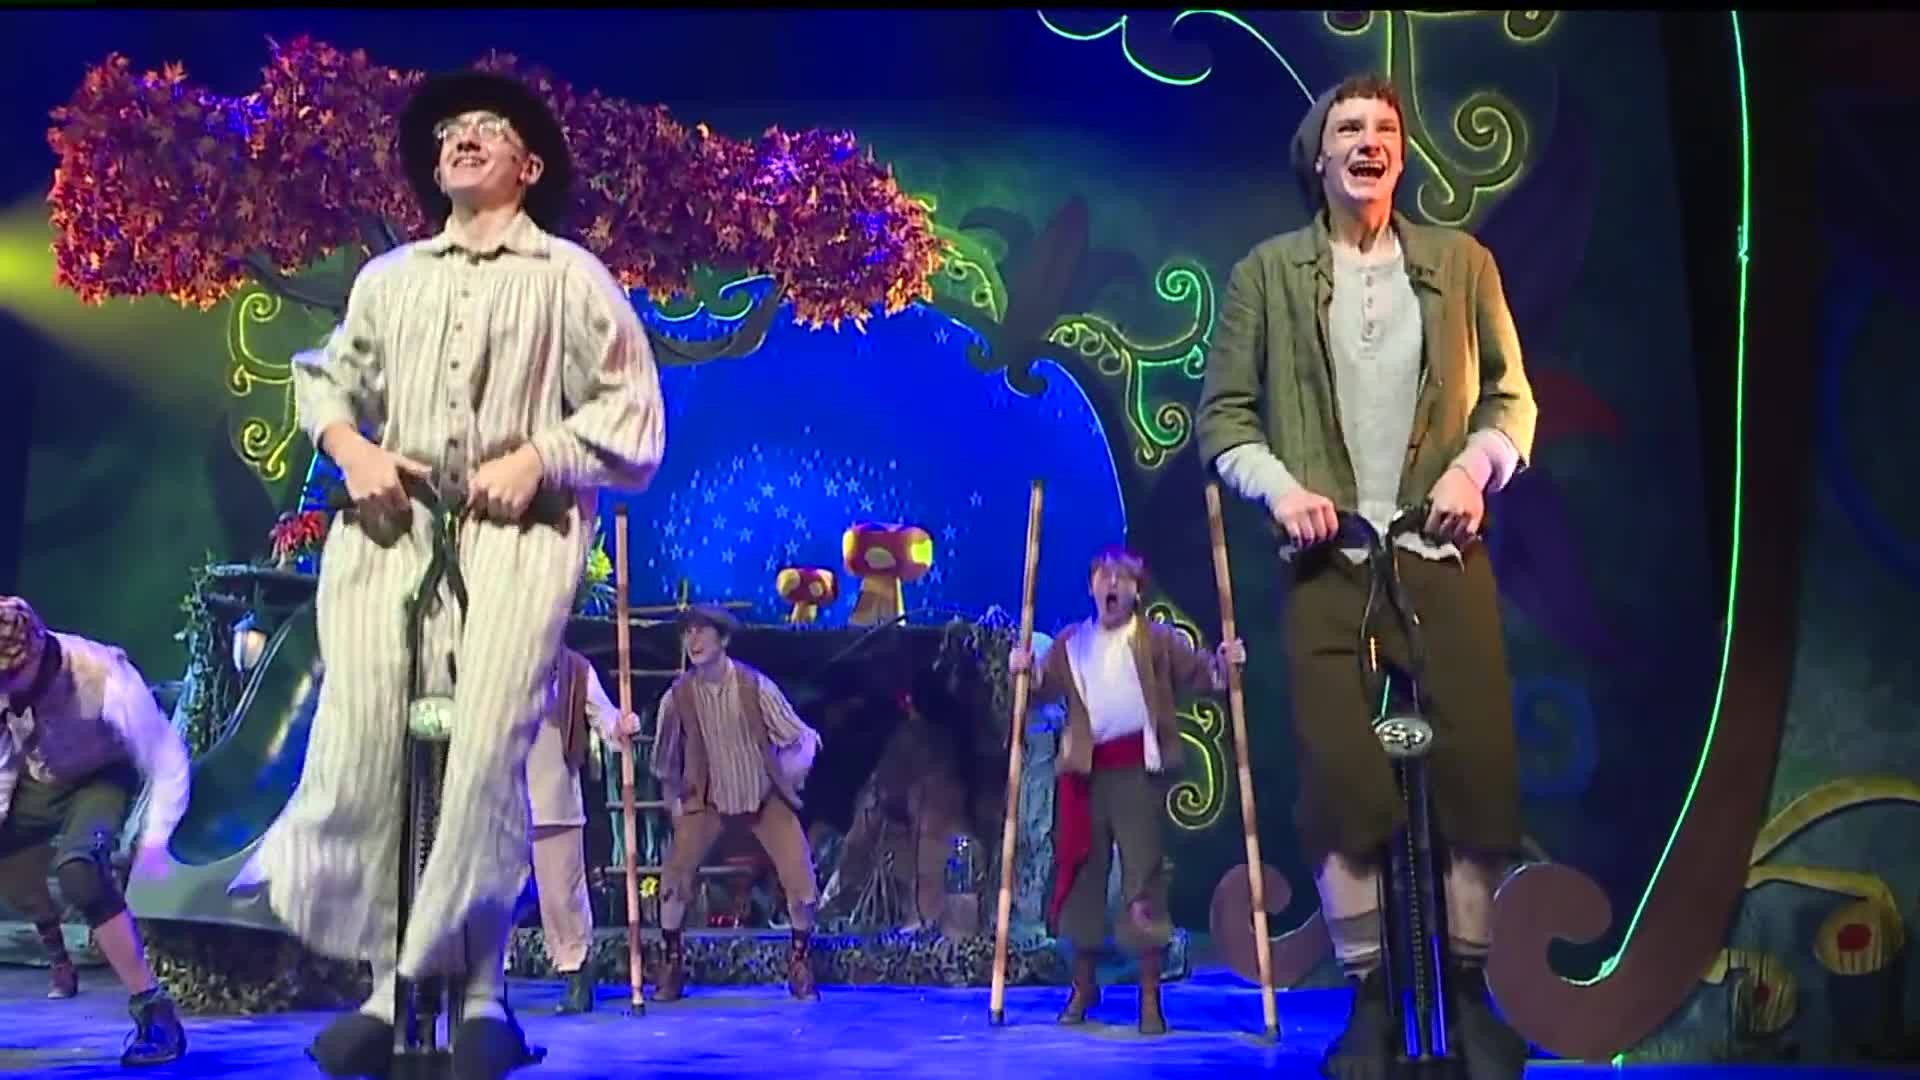 Visiting Neverland at the Fulton Theatre in "Peter Pan"